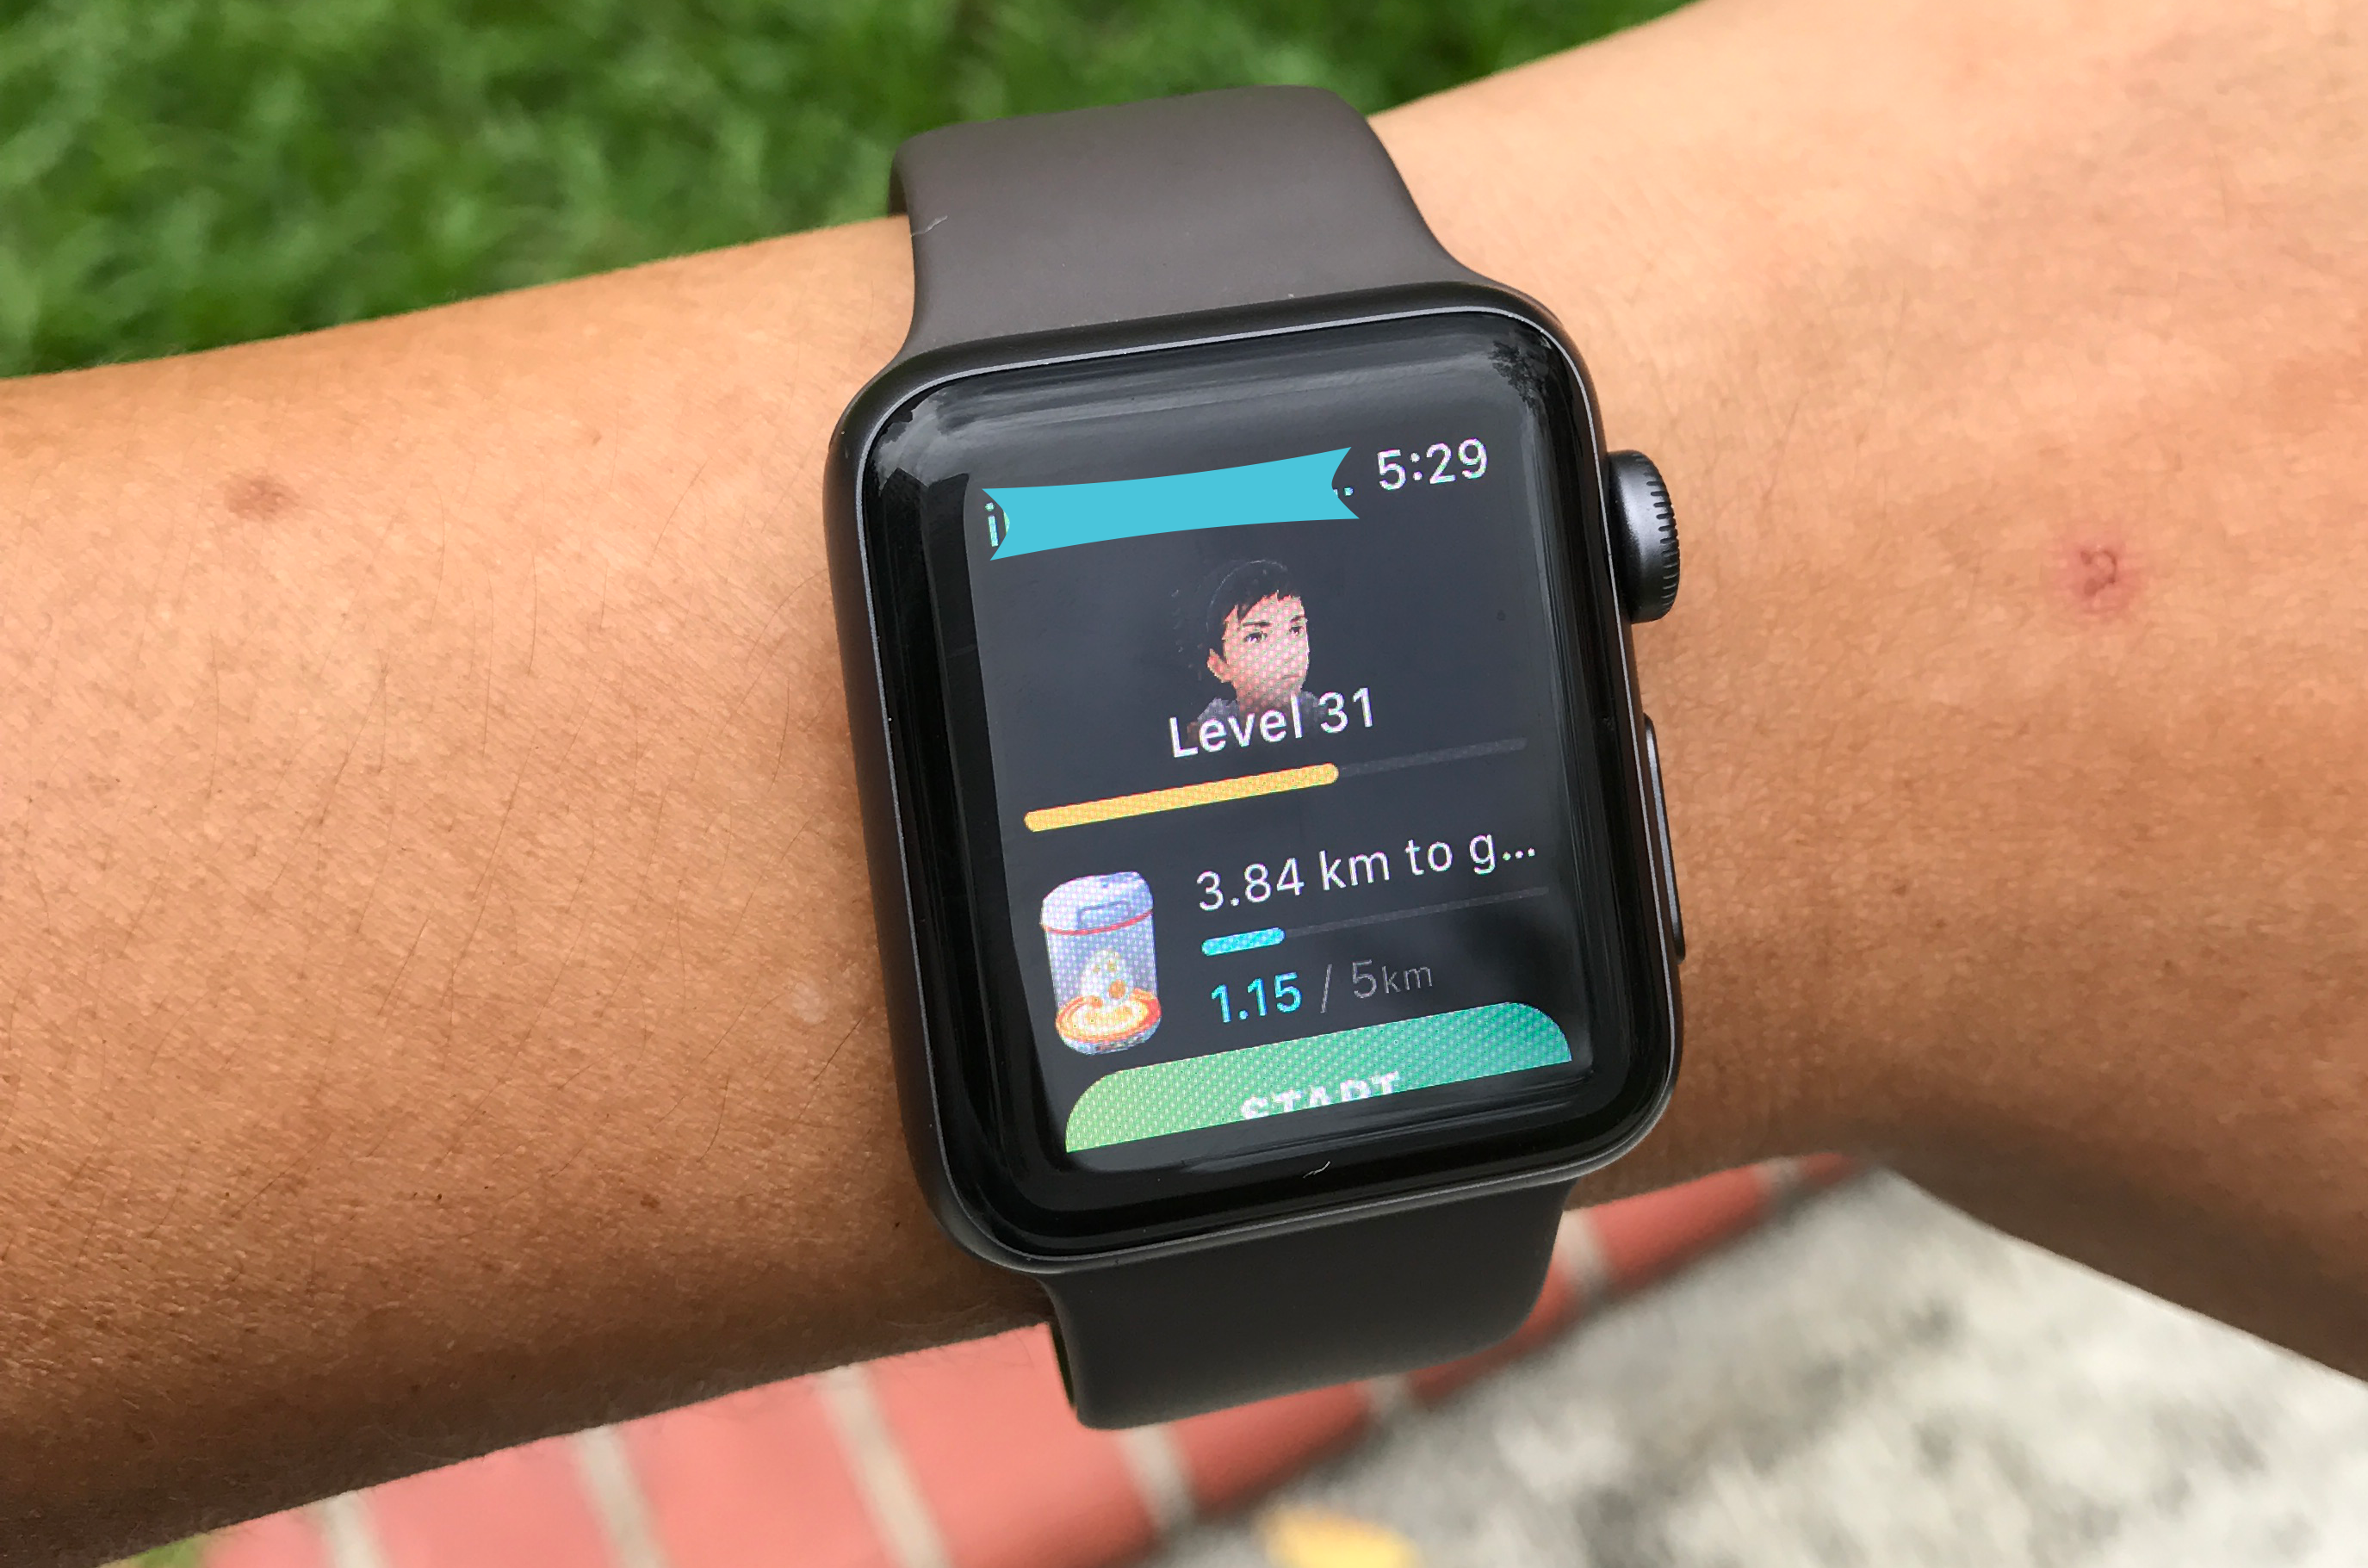 Pokemon Go is now available on Apple Watch! Screeble